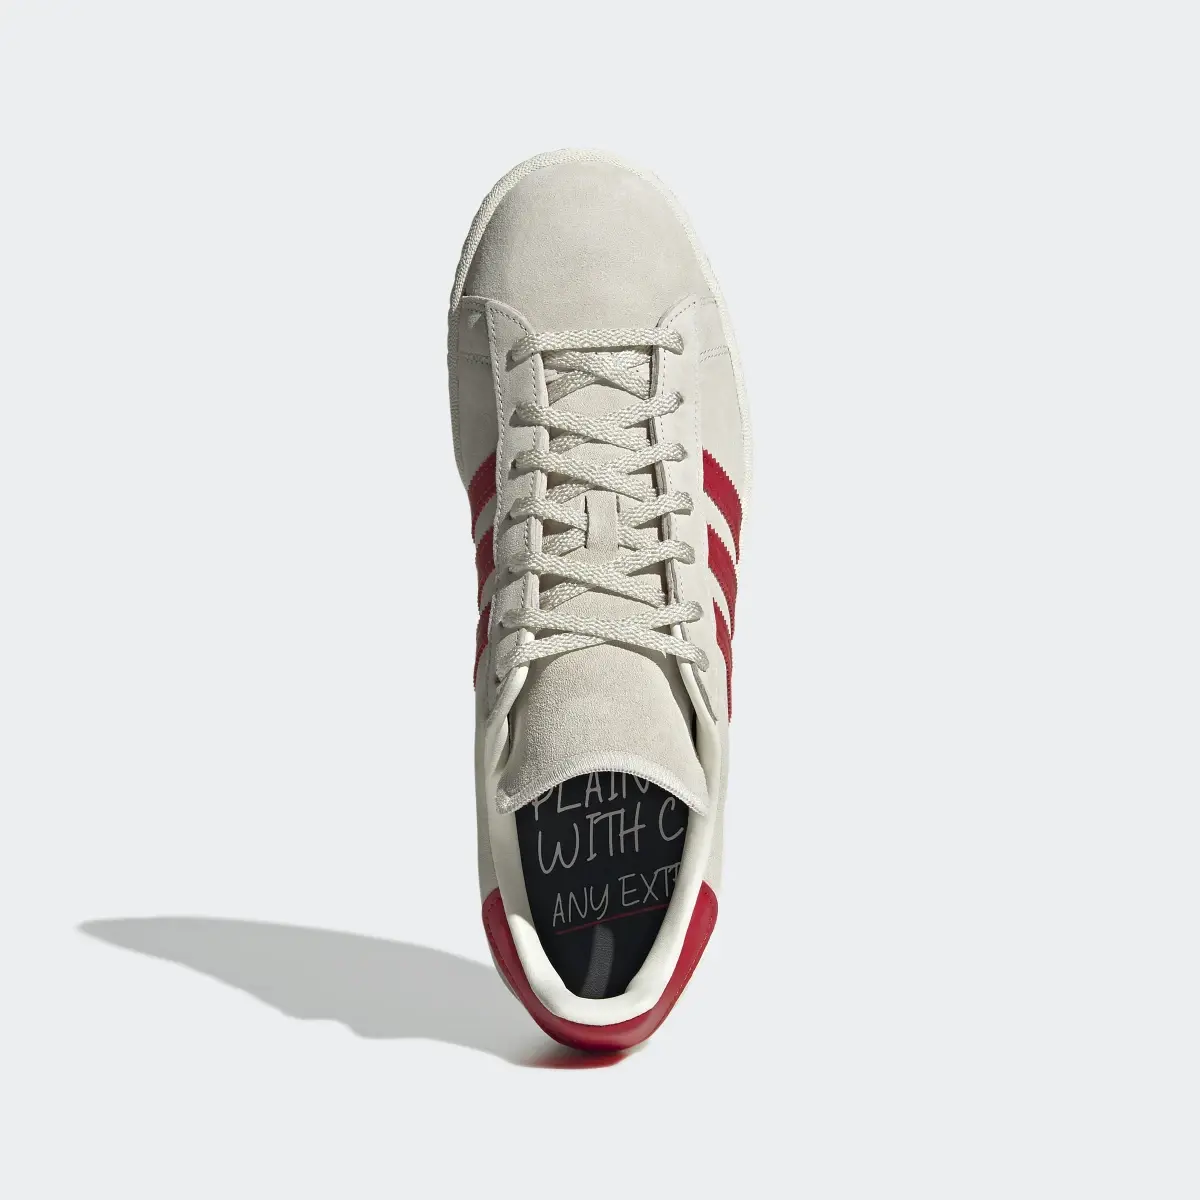 Adidas Campus 80s Shoes. 3